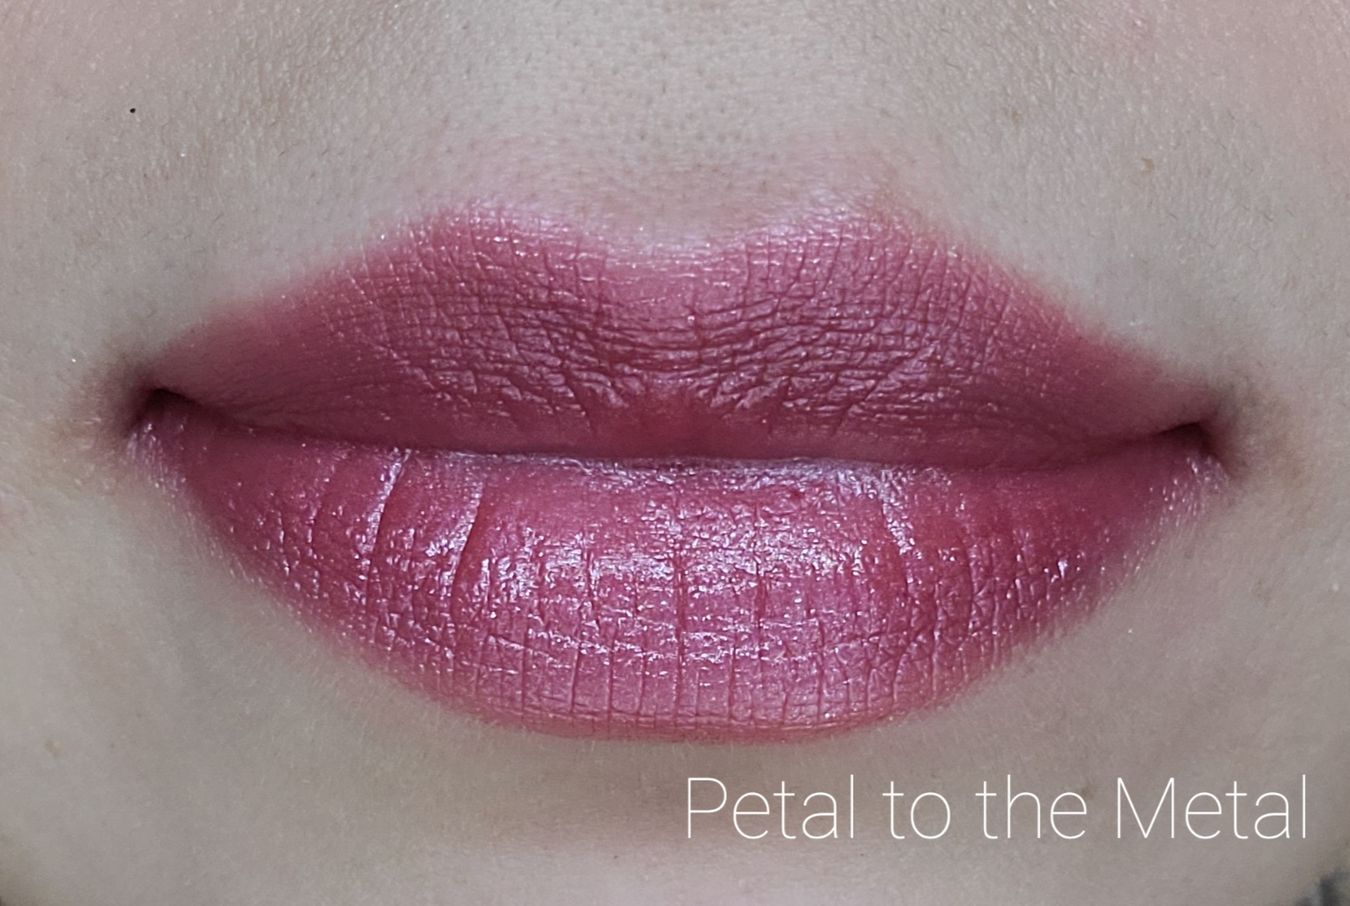 Image of close up lips wearing the lipstick in the shade called Petal To The Metal. A rosy mauve medium pink with hints of berry and slight shimmer.